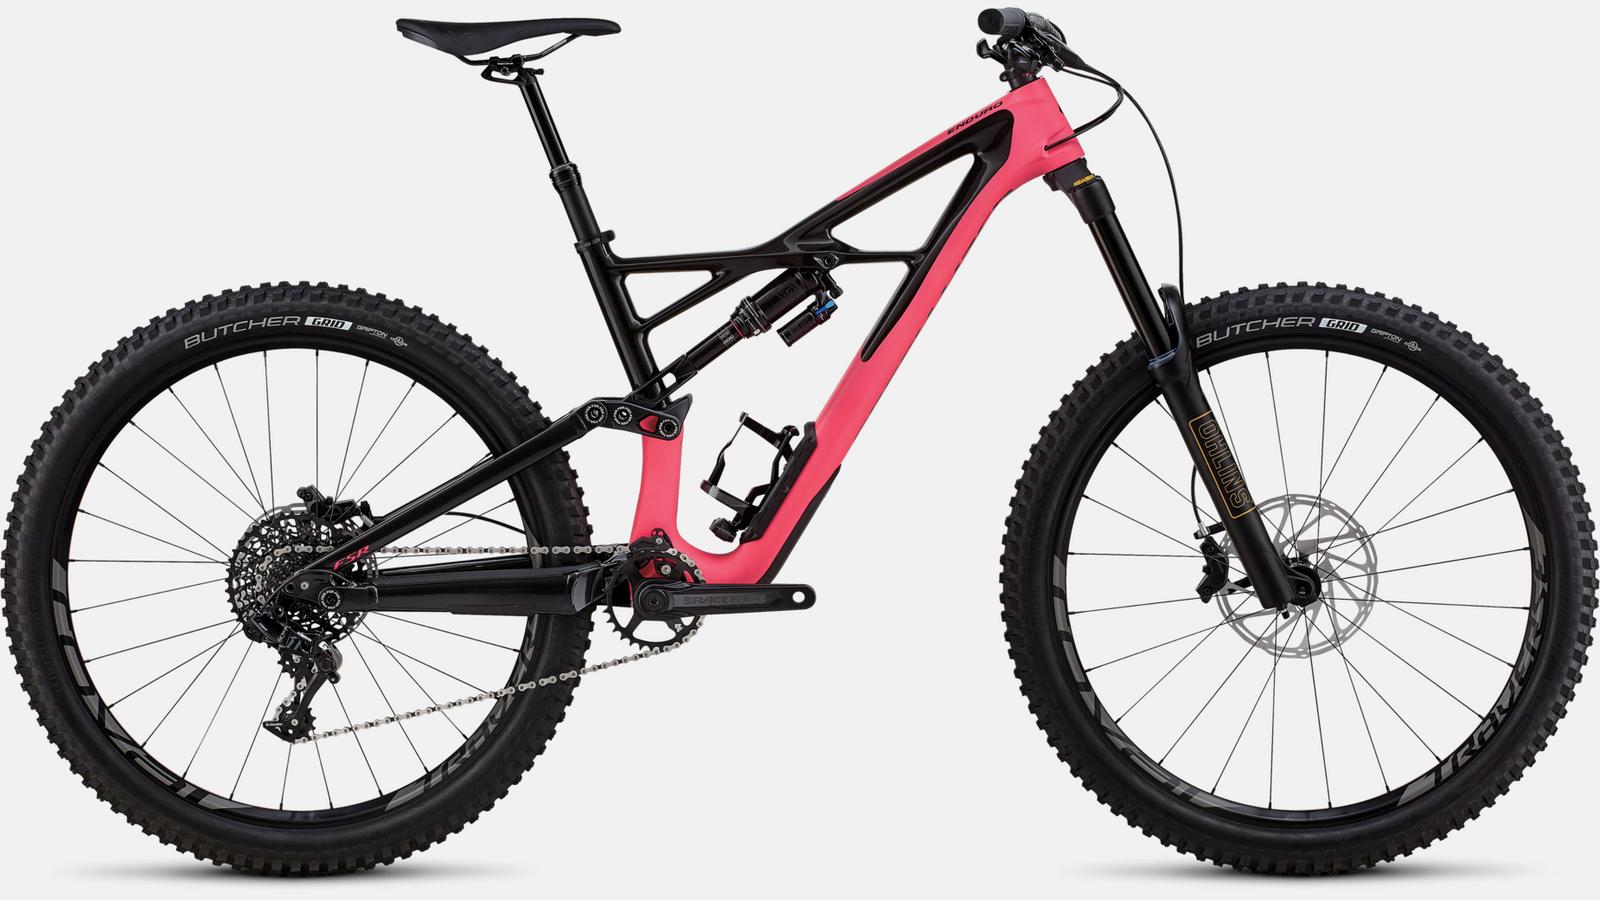 Paint for 2018 Specialized Enduro Elite 27.5 - Gloss Acid Pink